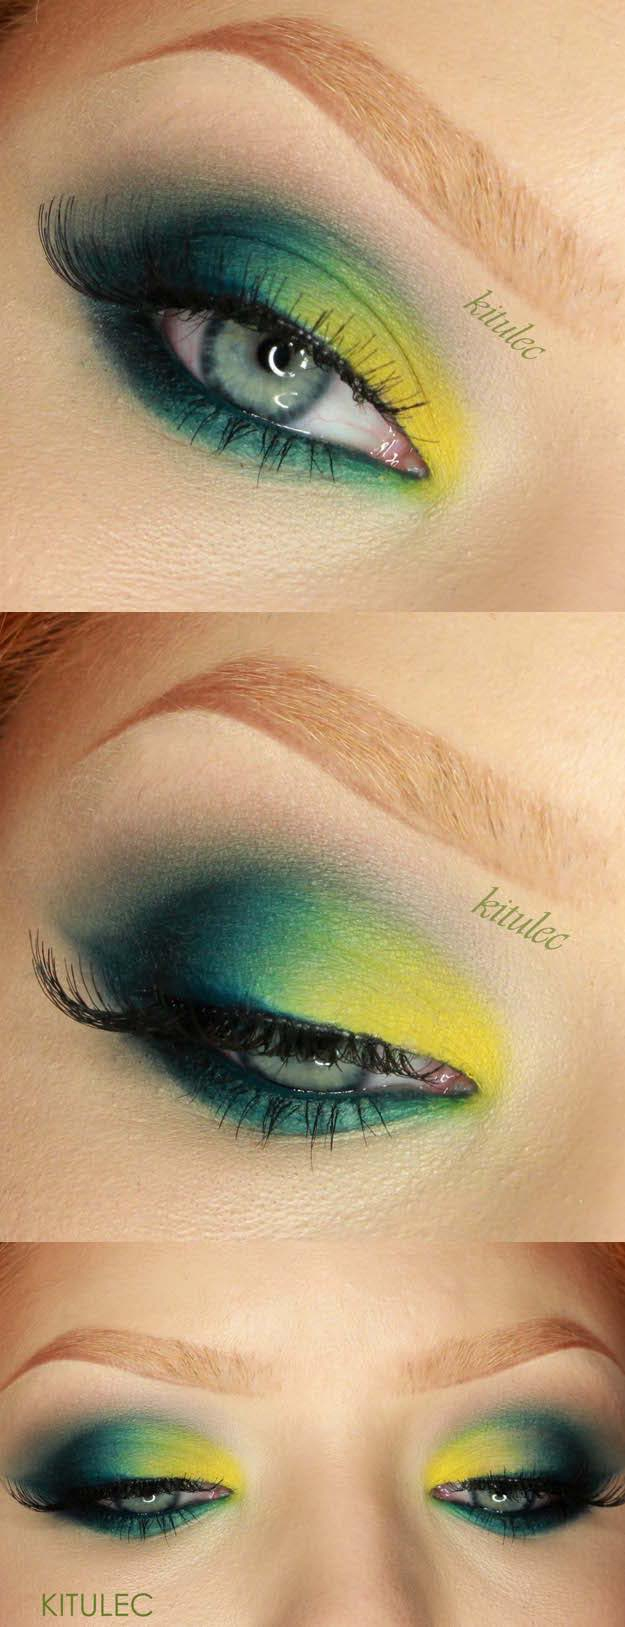 How To Apply Eye Makeup For Green Eyes 50 Perfect Makeup Tutorials For Green Eyes The Goddess